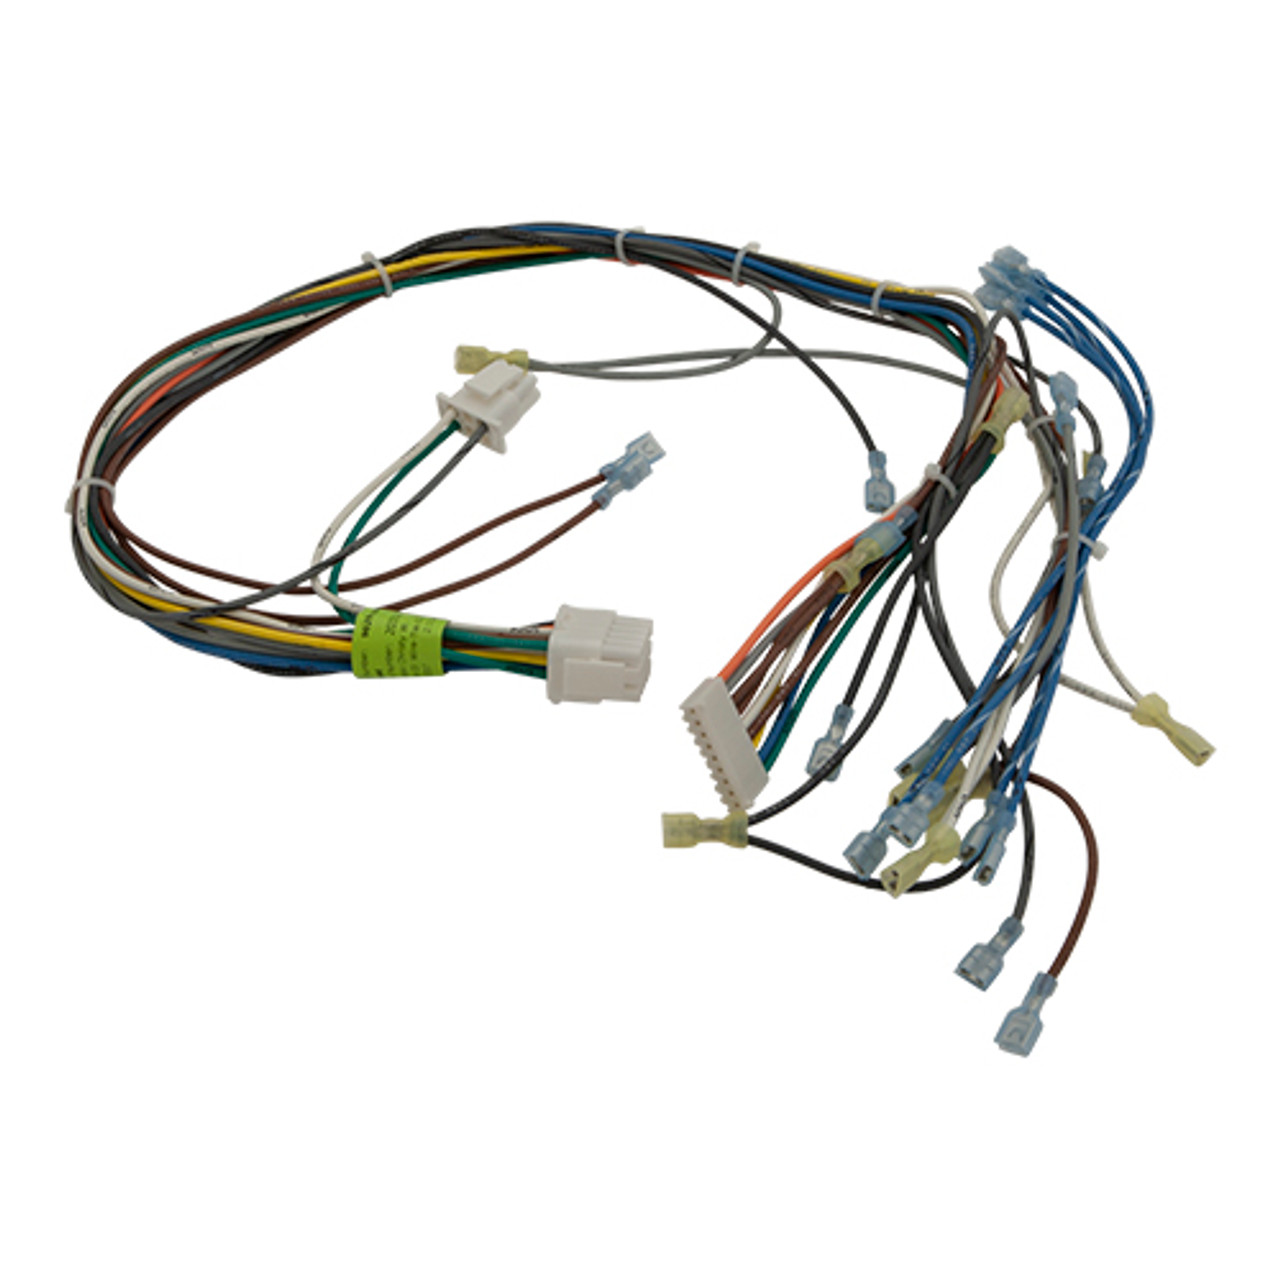 Southbend 1195321 - Control Harness, Wendys Gas